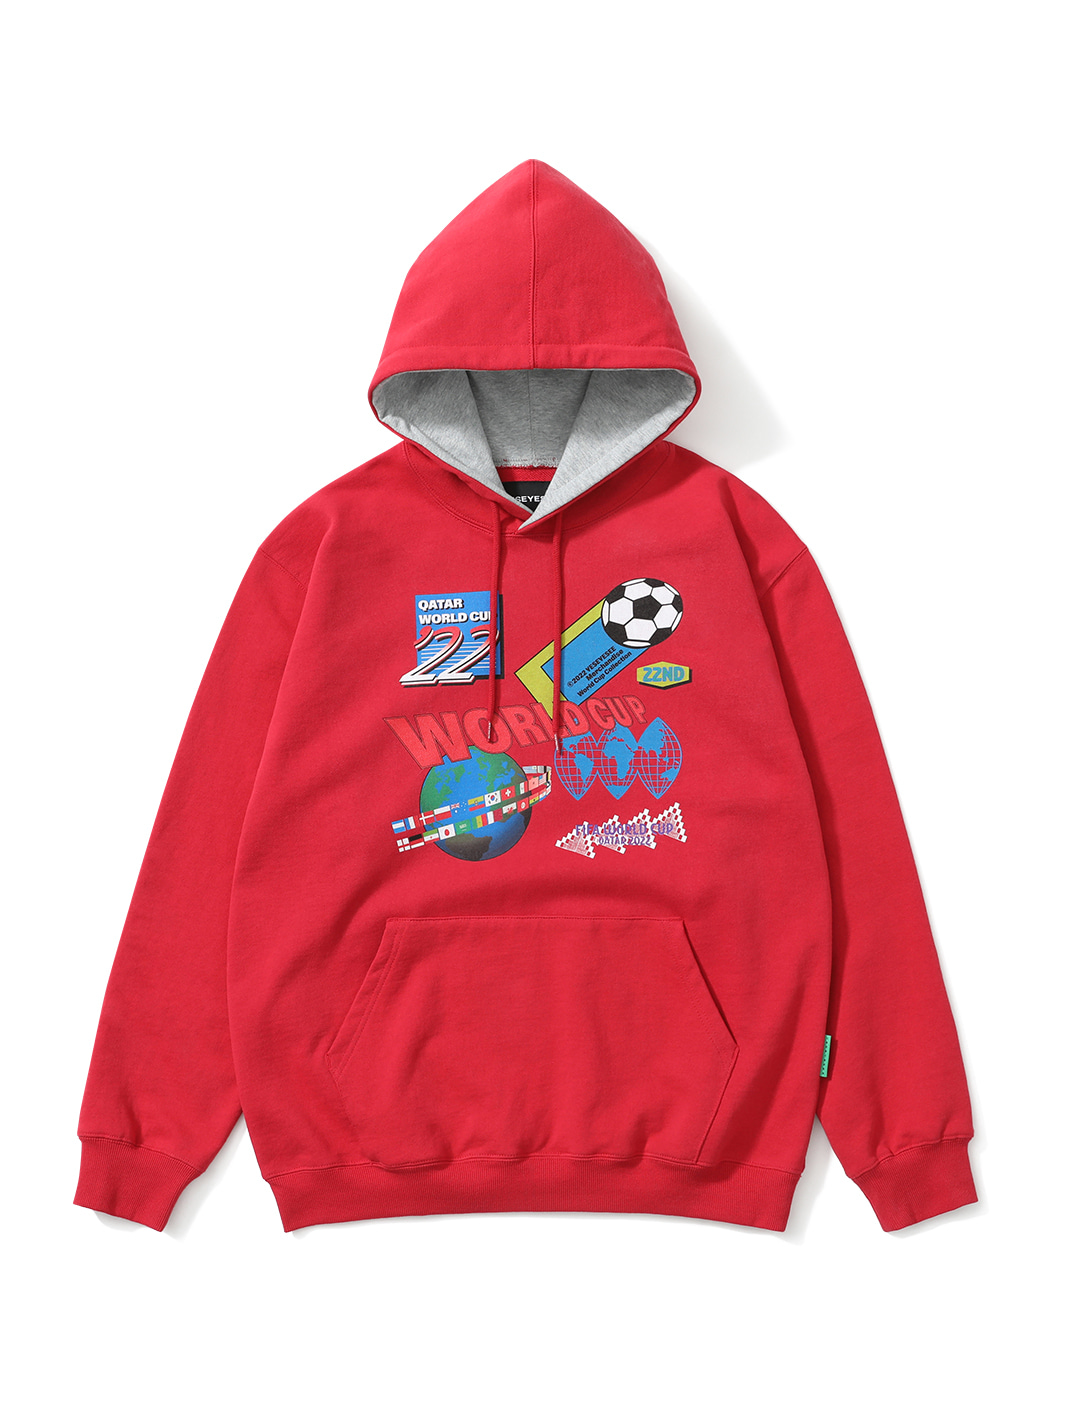 Y.E.S World Hoodie Red